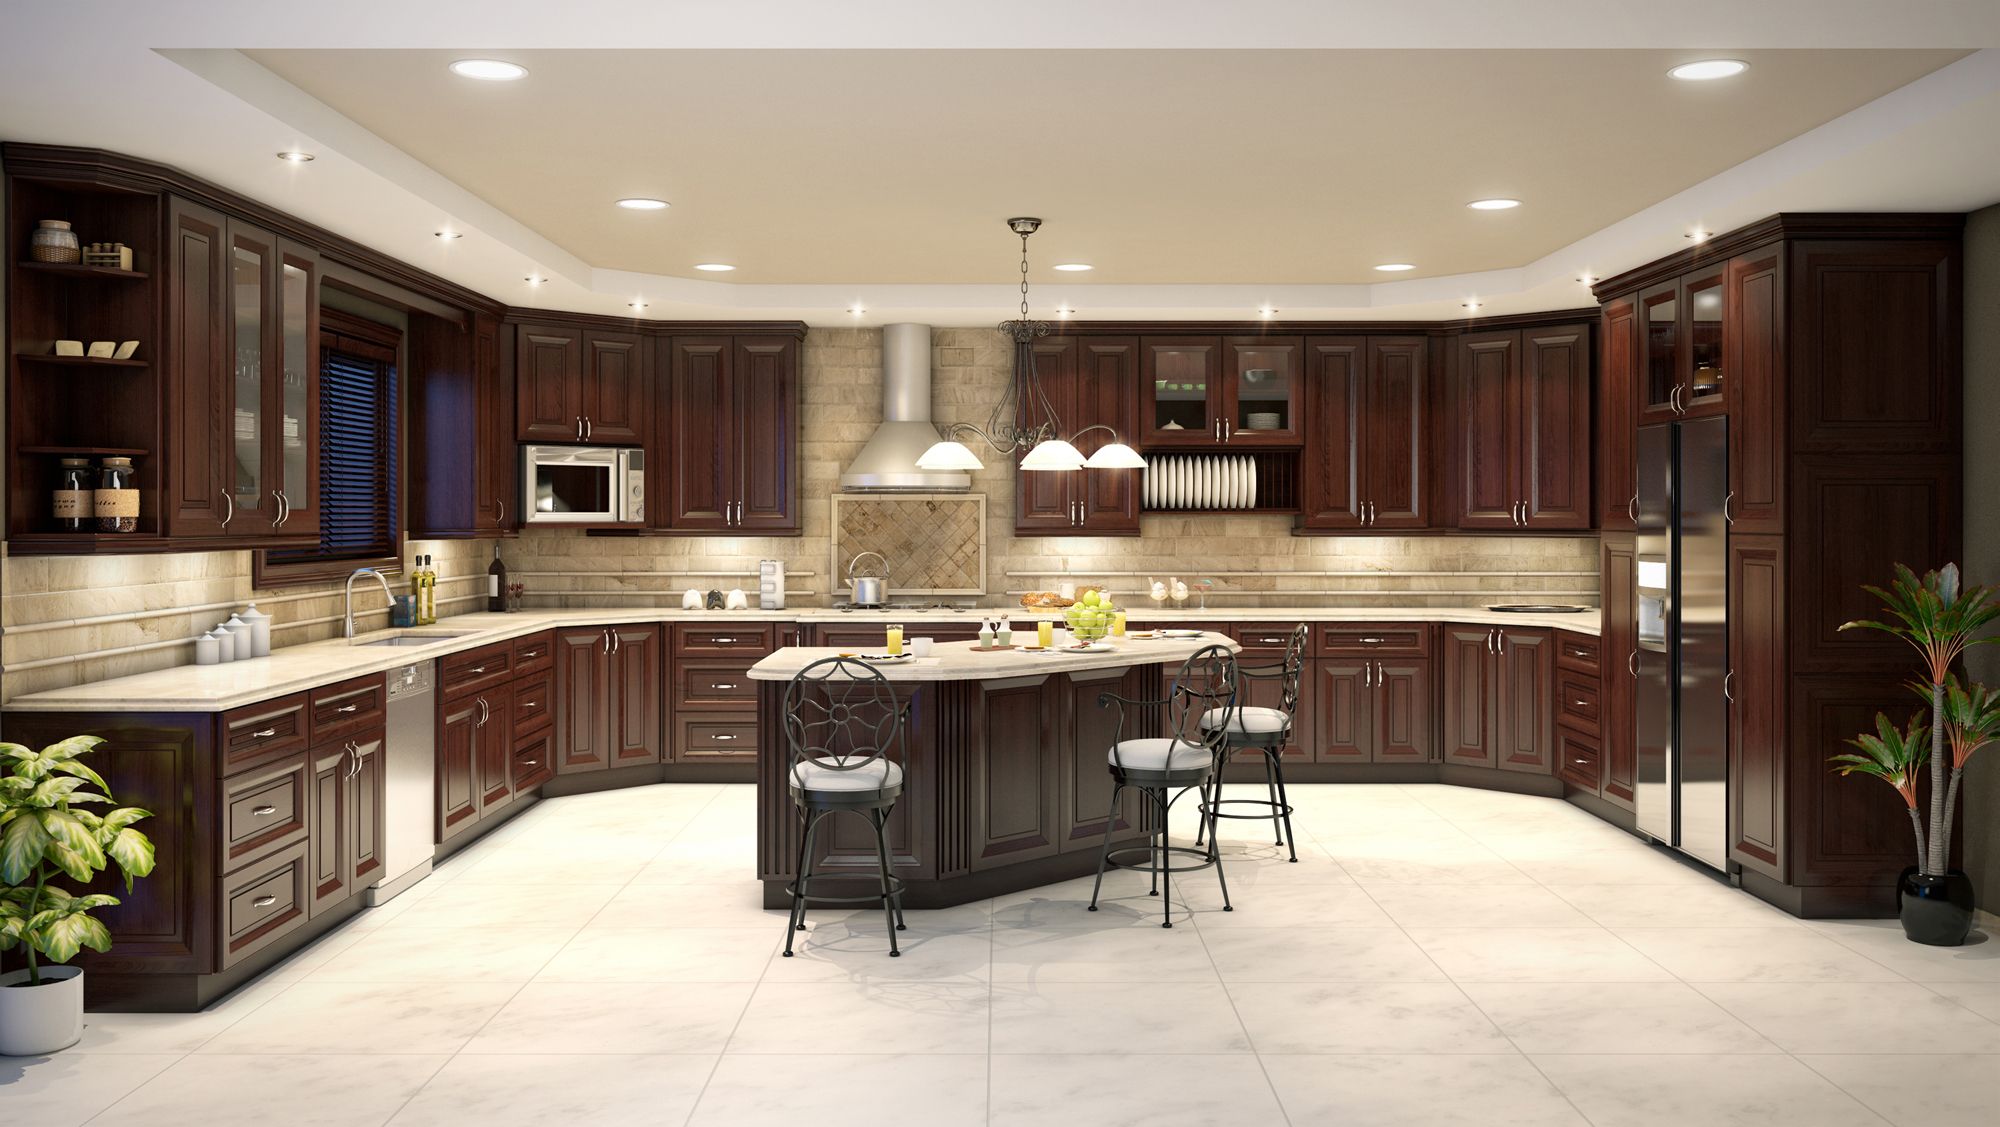 Kitchen Remodeling Contractor in RSM California